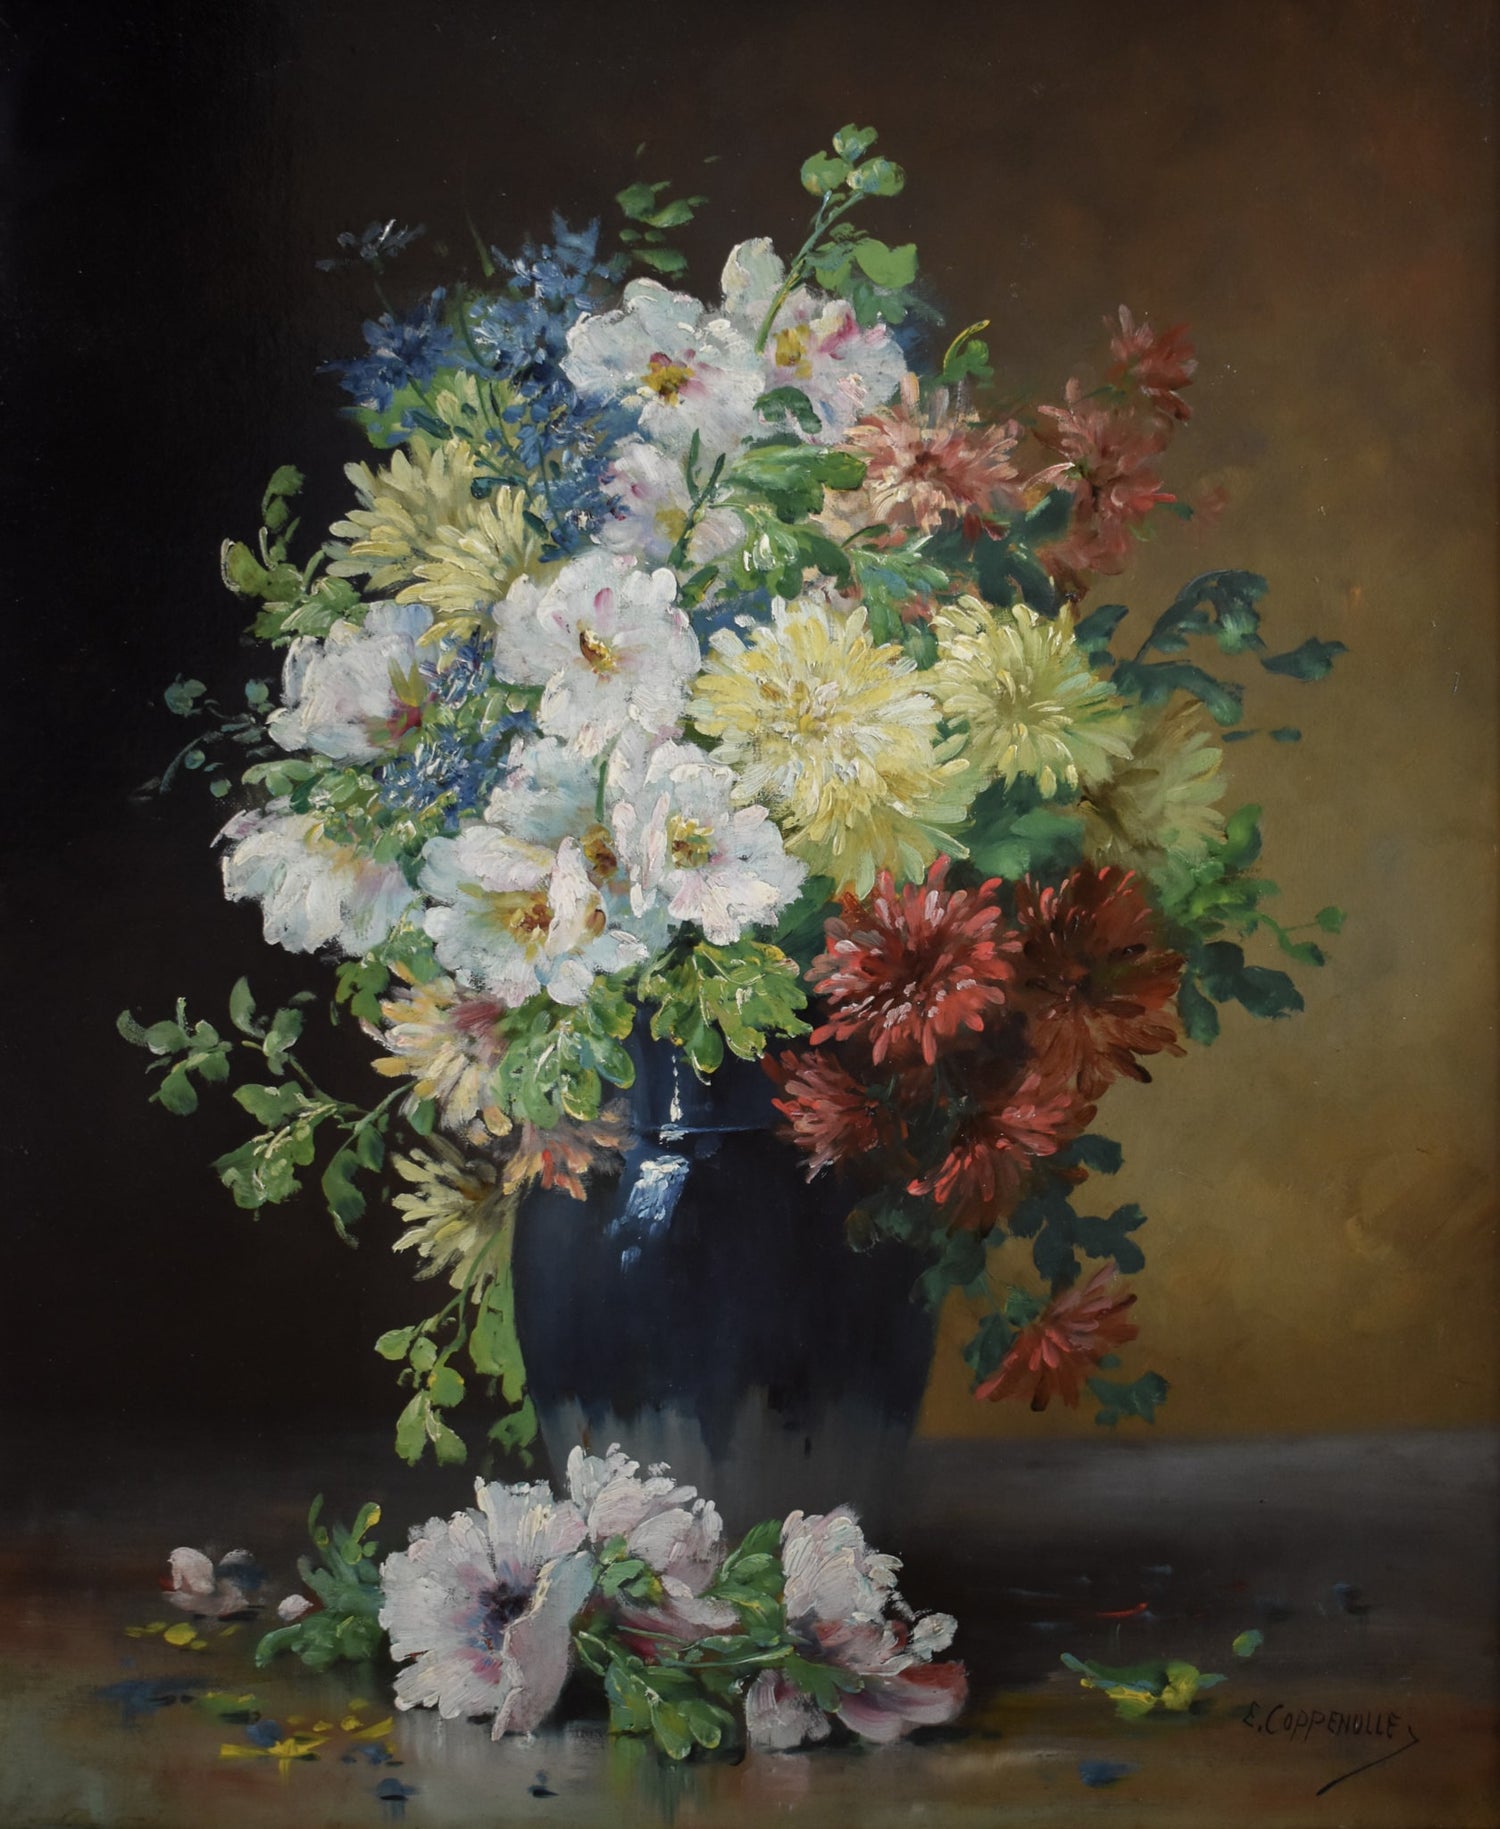 Still life paintings from the 17th century to the 20th century for sale at Winckelmann Gallery